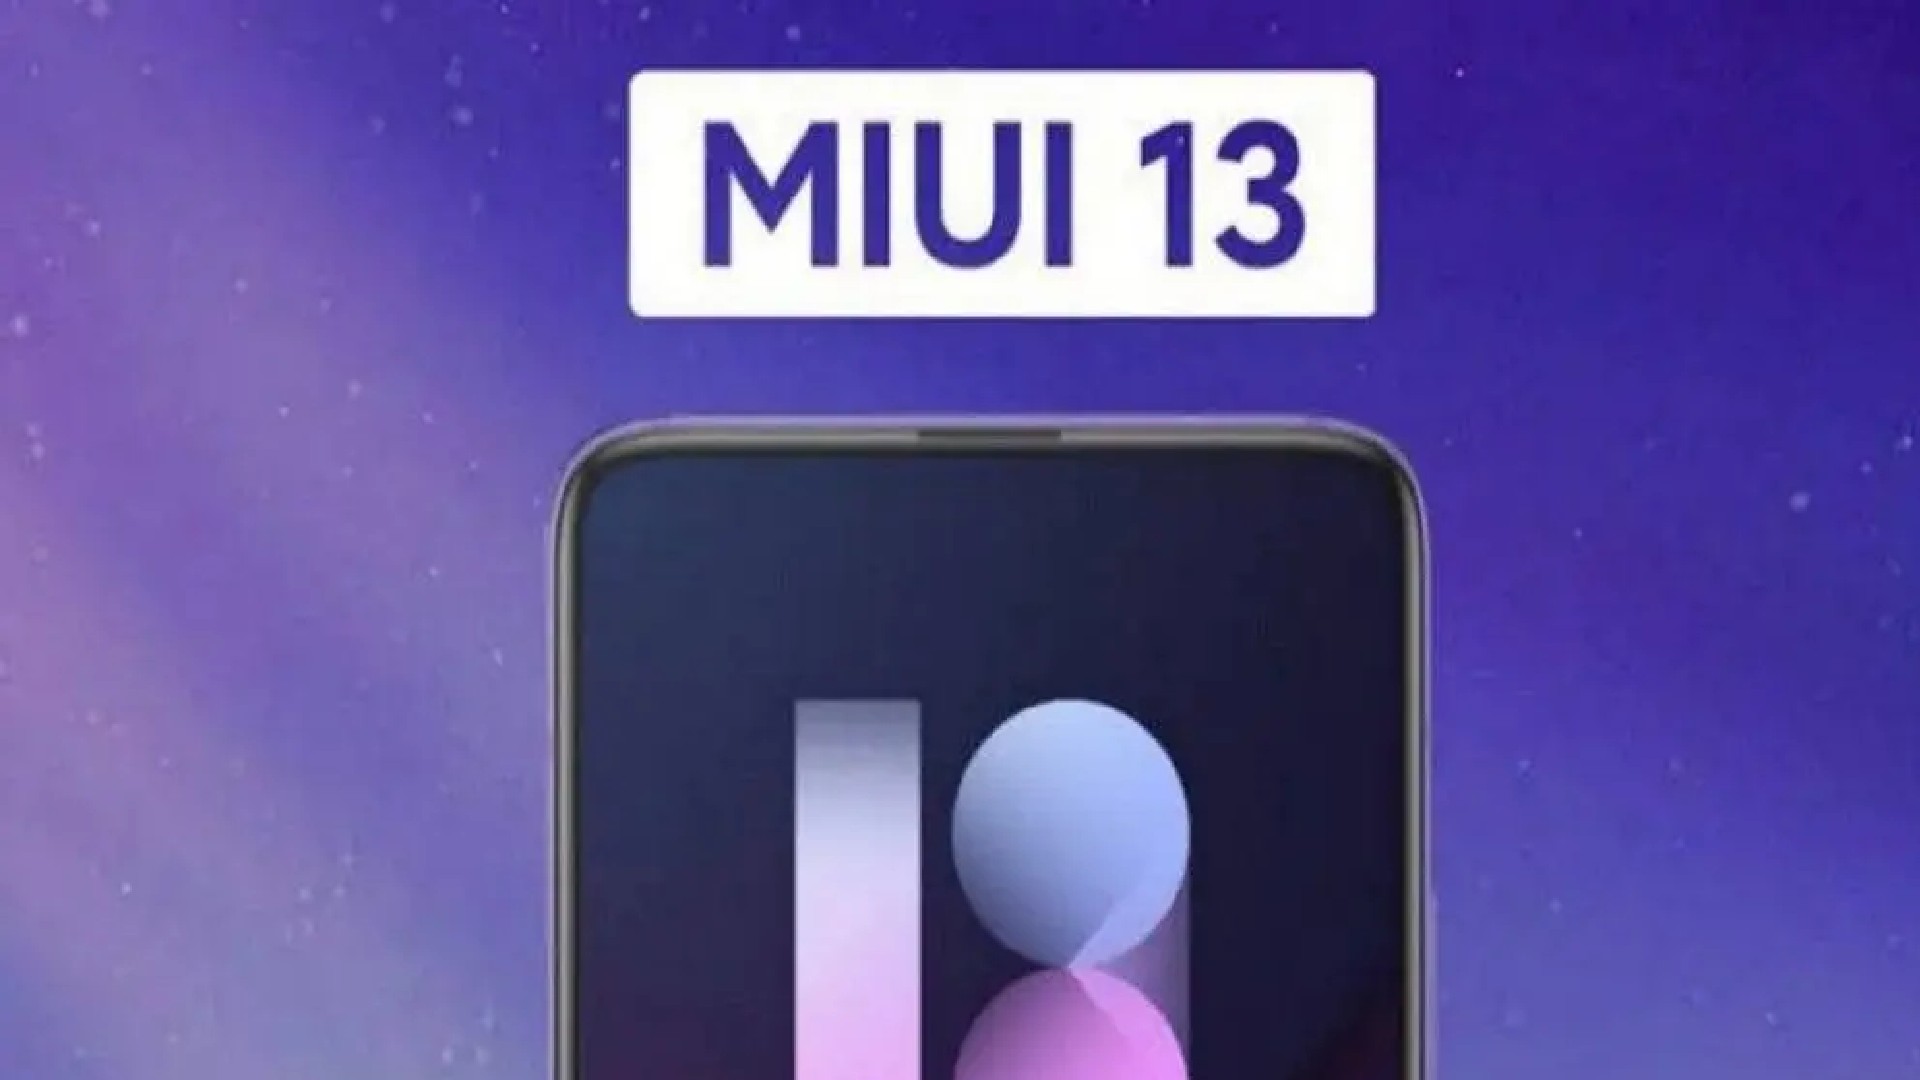 MIUI 13 India Release Update: First Devices To Receive MIUI 13 Update